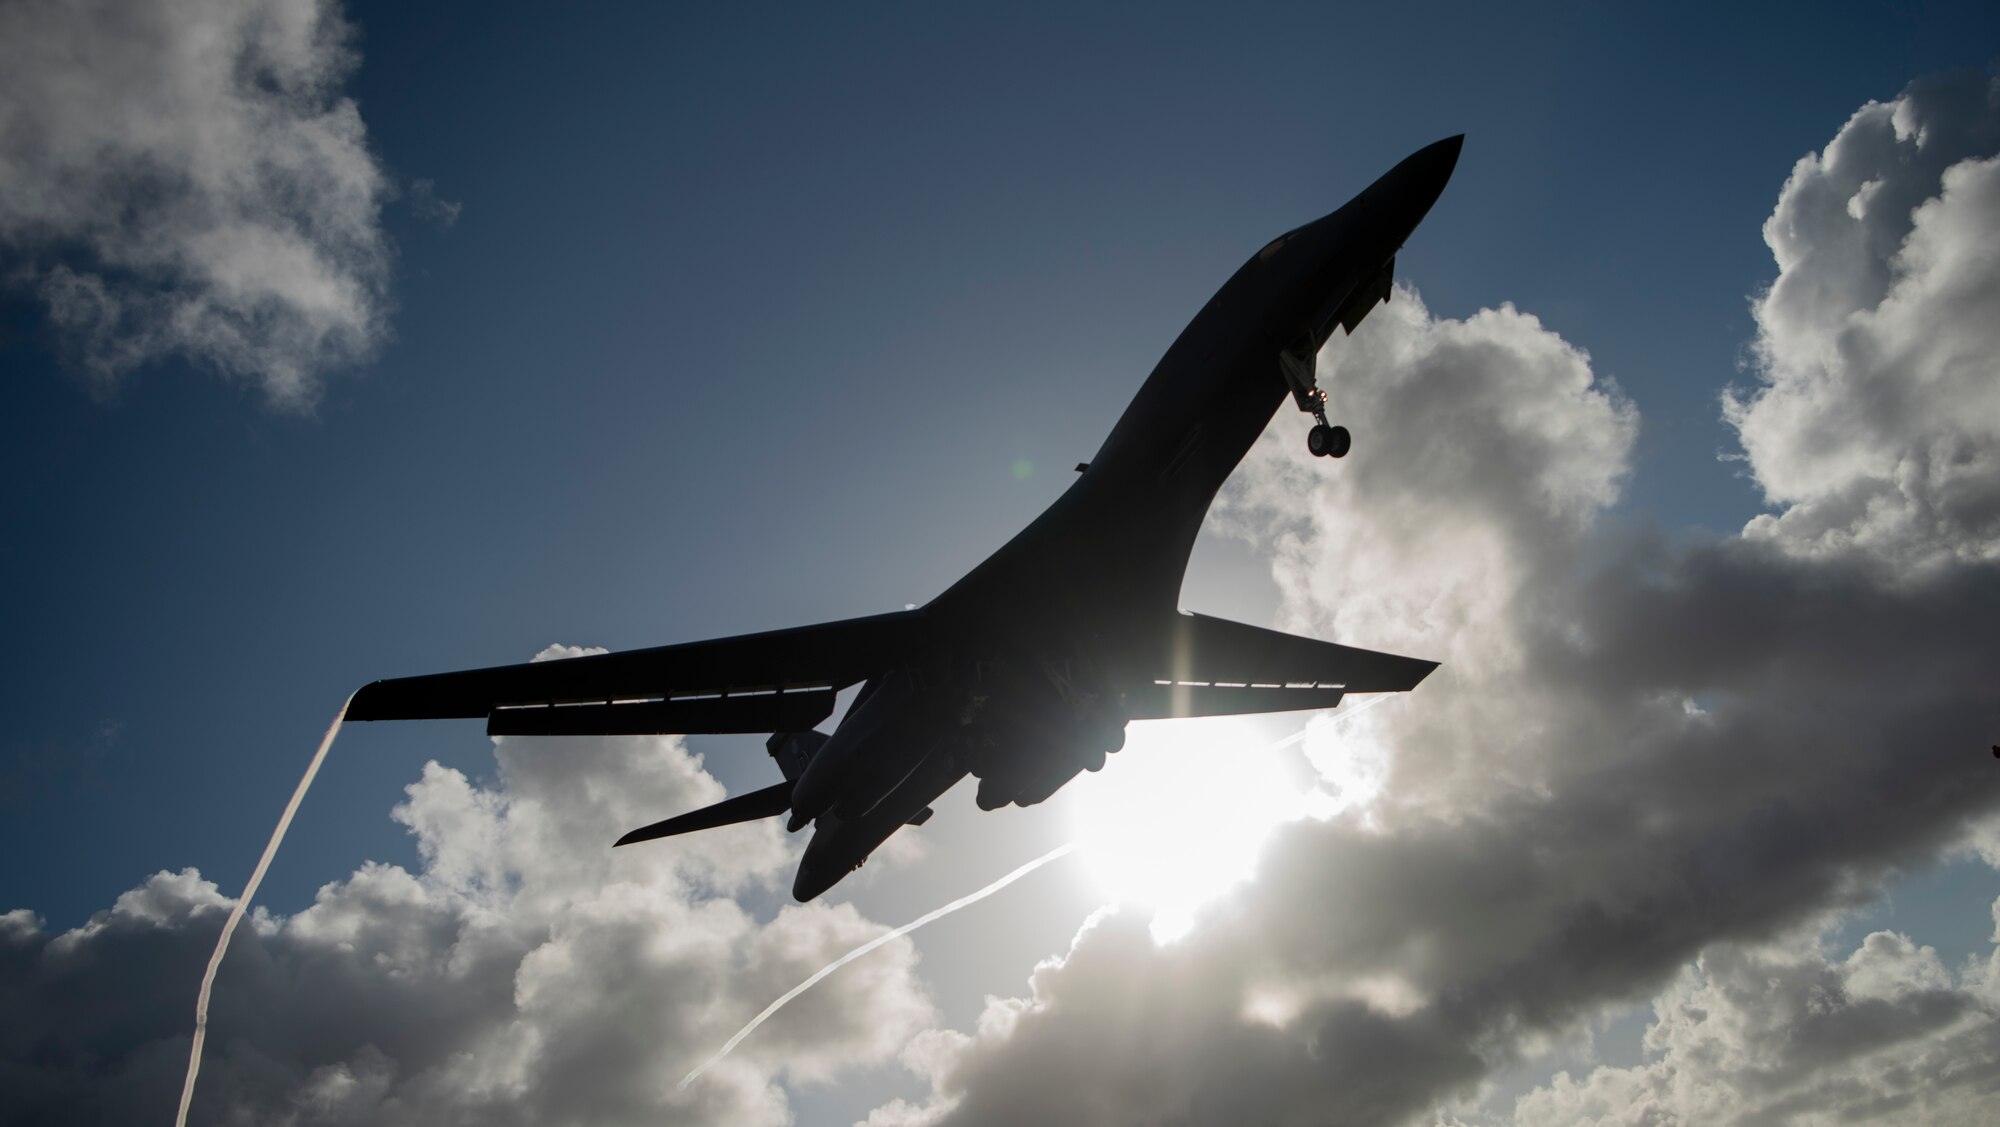 A 9th Expeditionary Bomb Squadron B-1B Lancer prepares to land at Andersen Air Force Base, Guam, May 22, 2020. This B-1B aircrew completed a 24-hour mission that included a large force exercise. The 9th EBS is deployed to Andersen Air Force Base, Guam, as part of a Bomber Task Force supporting Pacific Air Forces’ strategic deterrence missions and  commitment to the security and stability of the Indo-Pacific region. (U.S. Air Force photo by Senior Airman River Bruce)